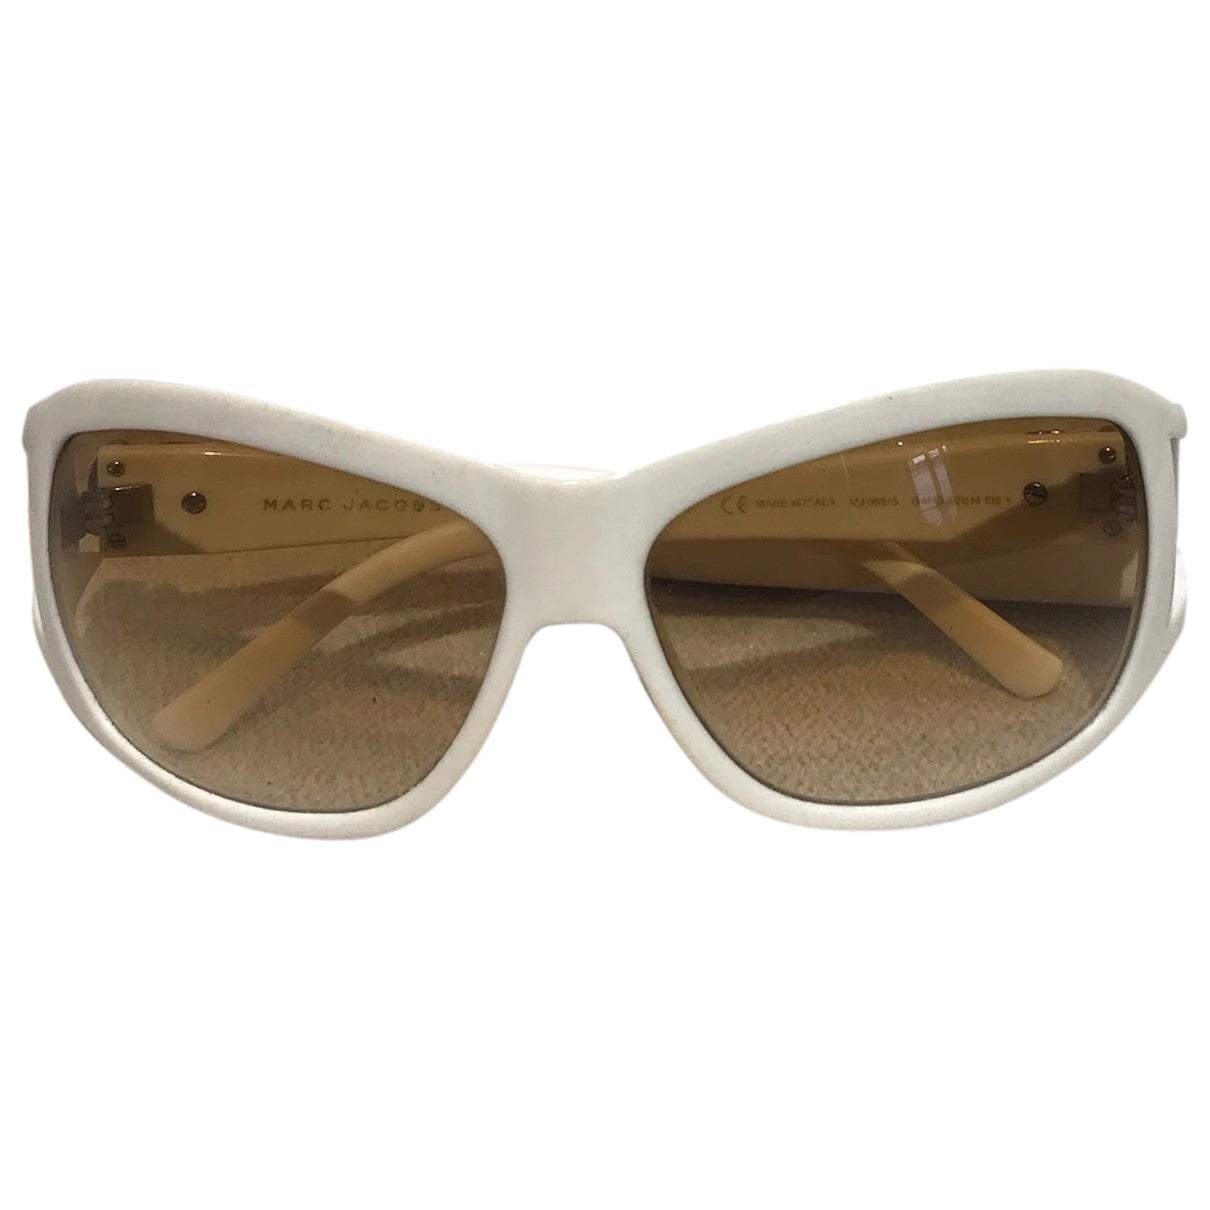 Lunettes Marc Jacobs blanches